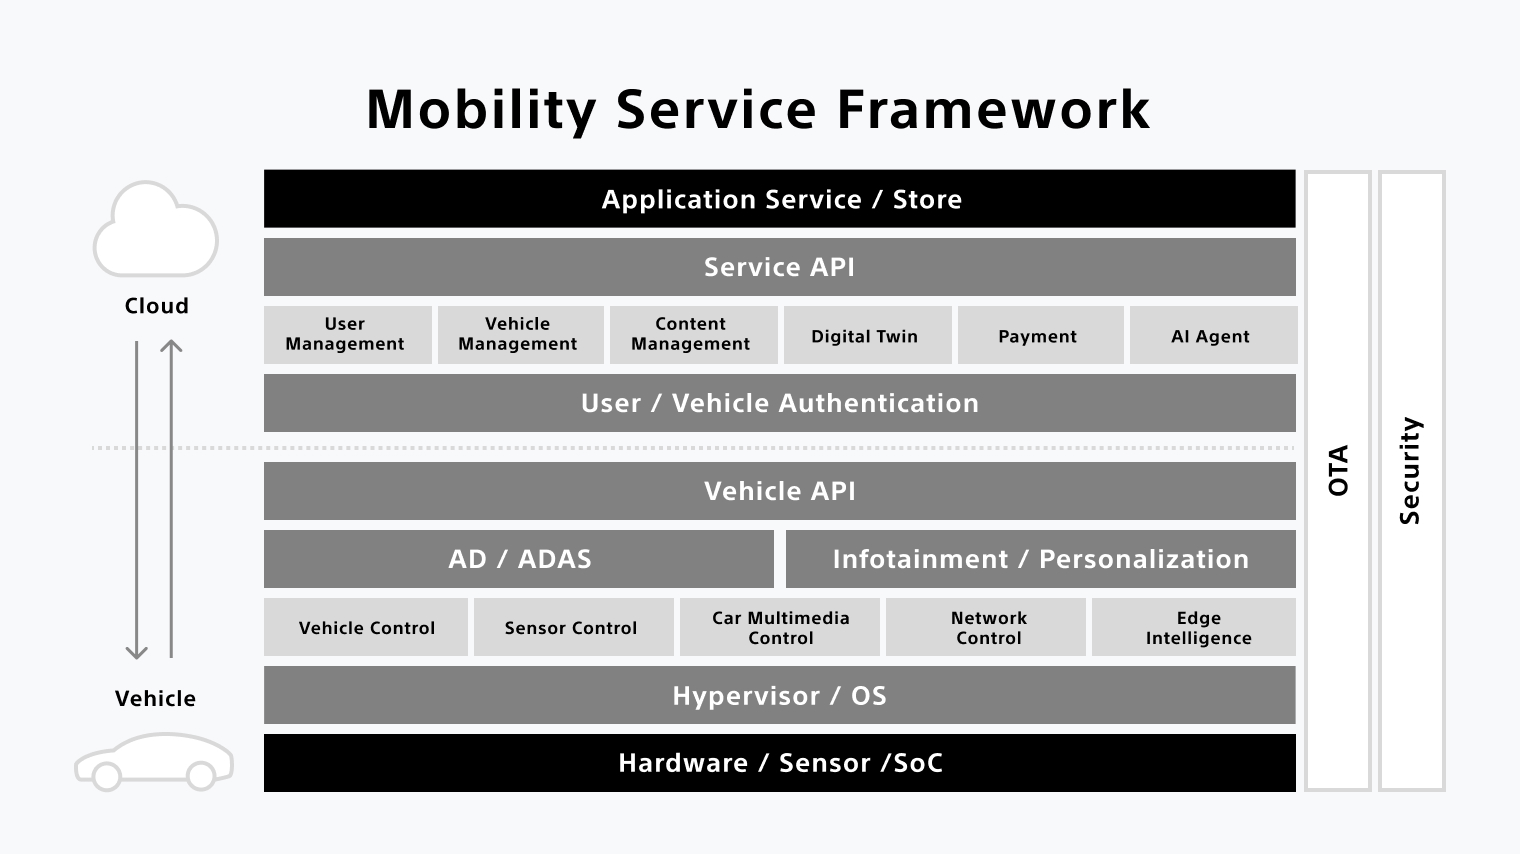 A chart that shows our mobility service framework.